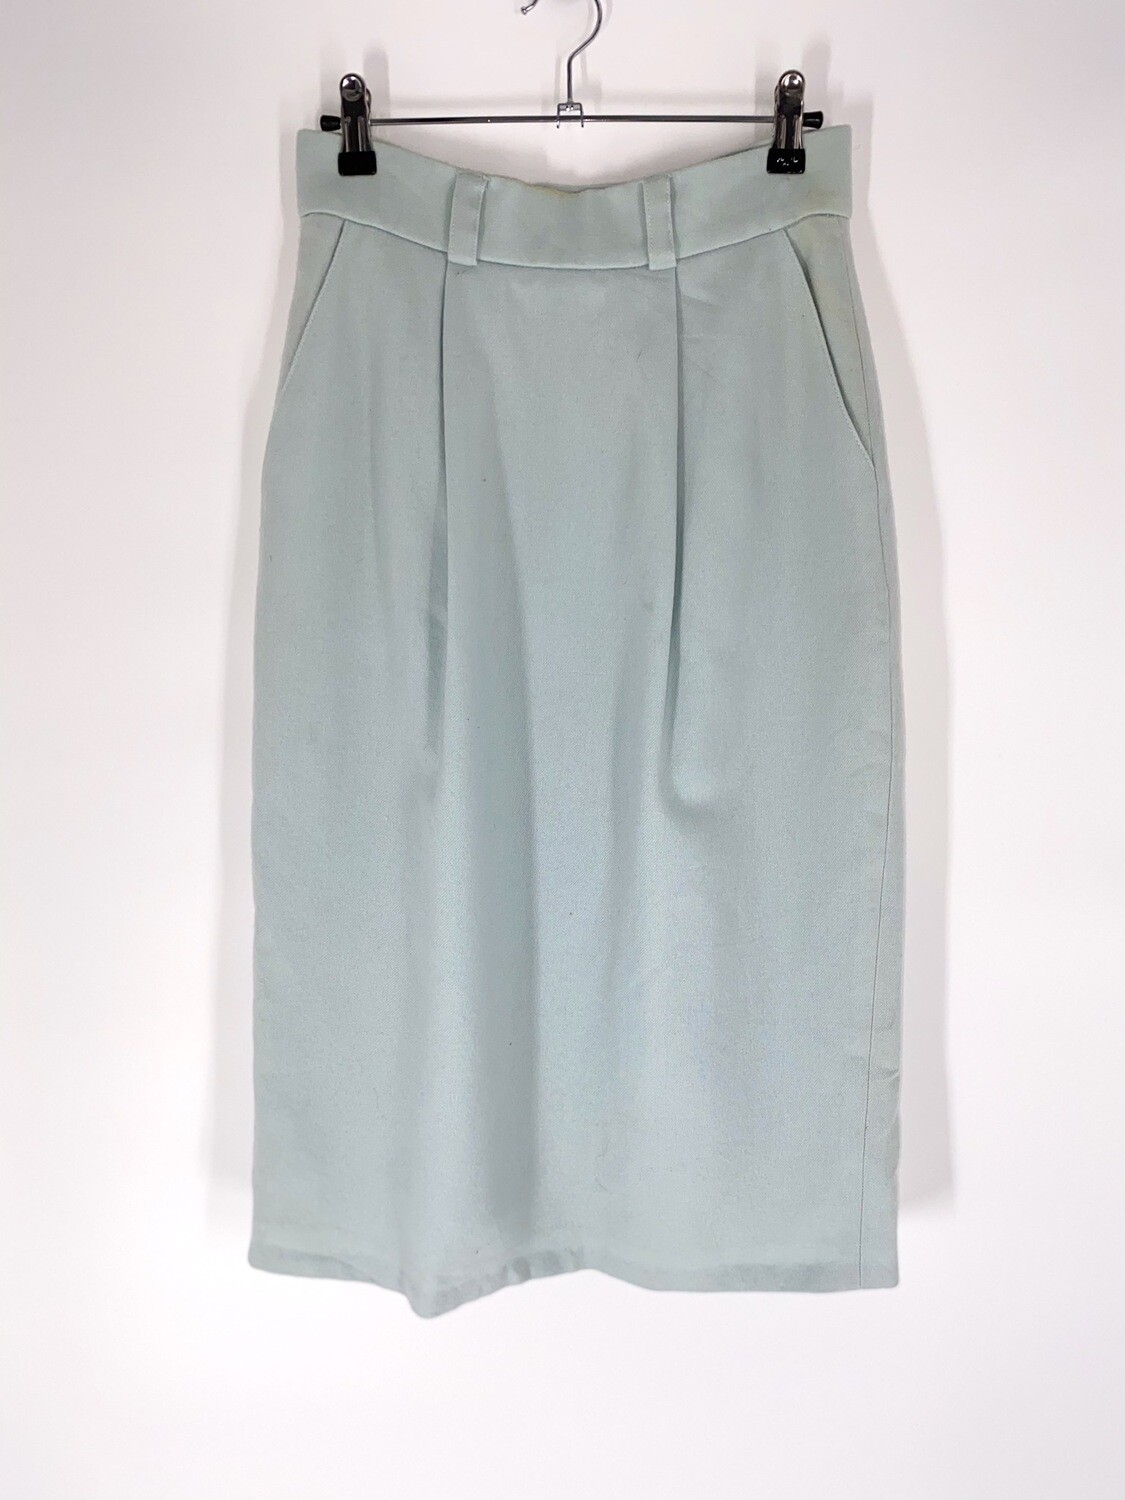 Baby Blue Pencil Skirt Size M